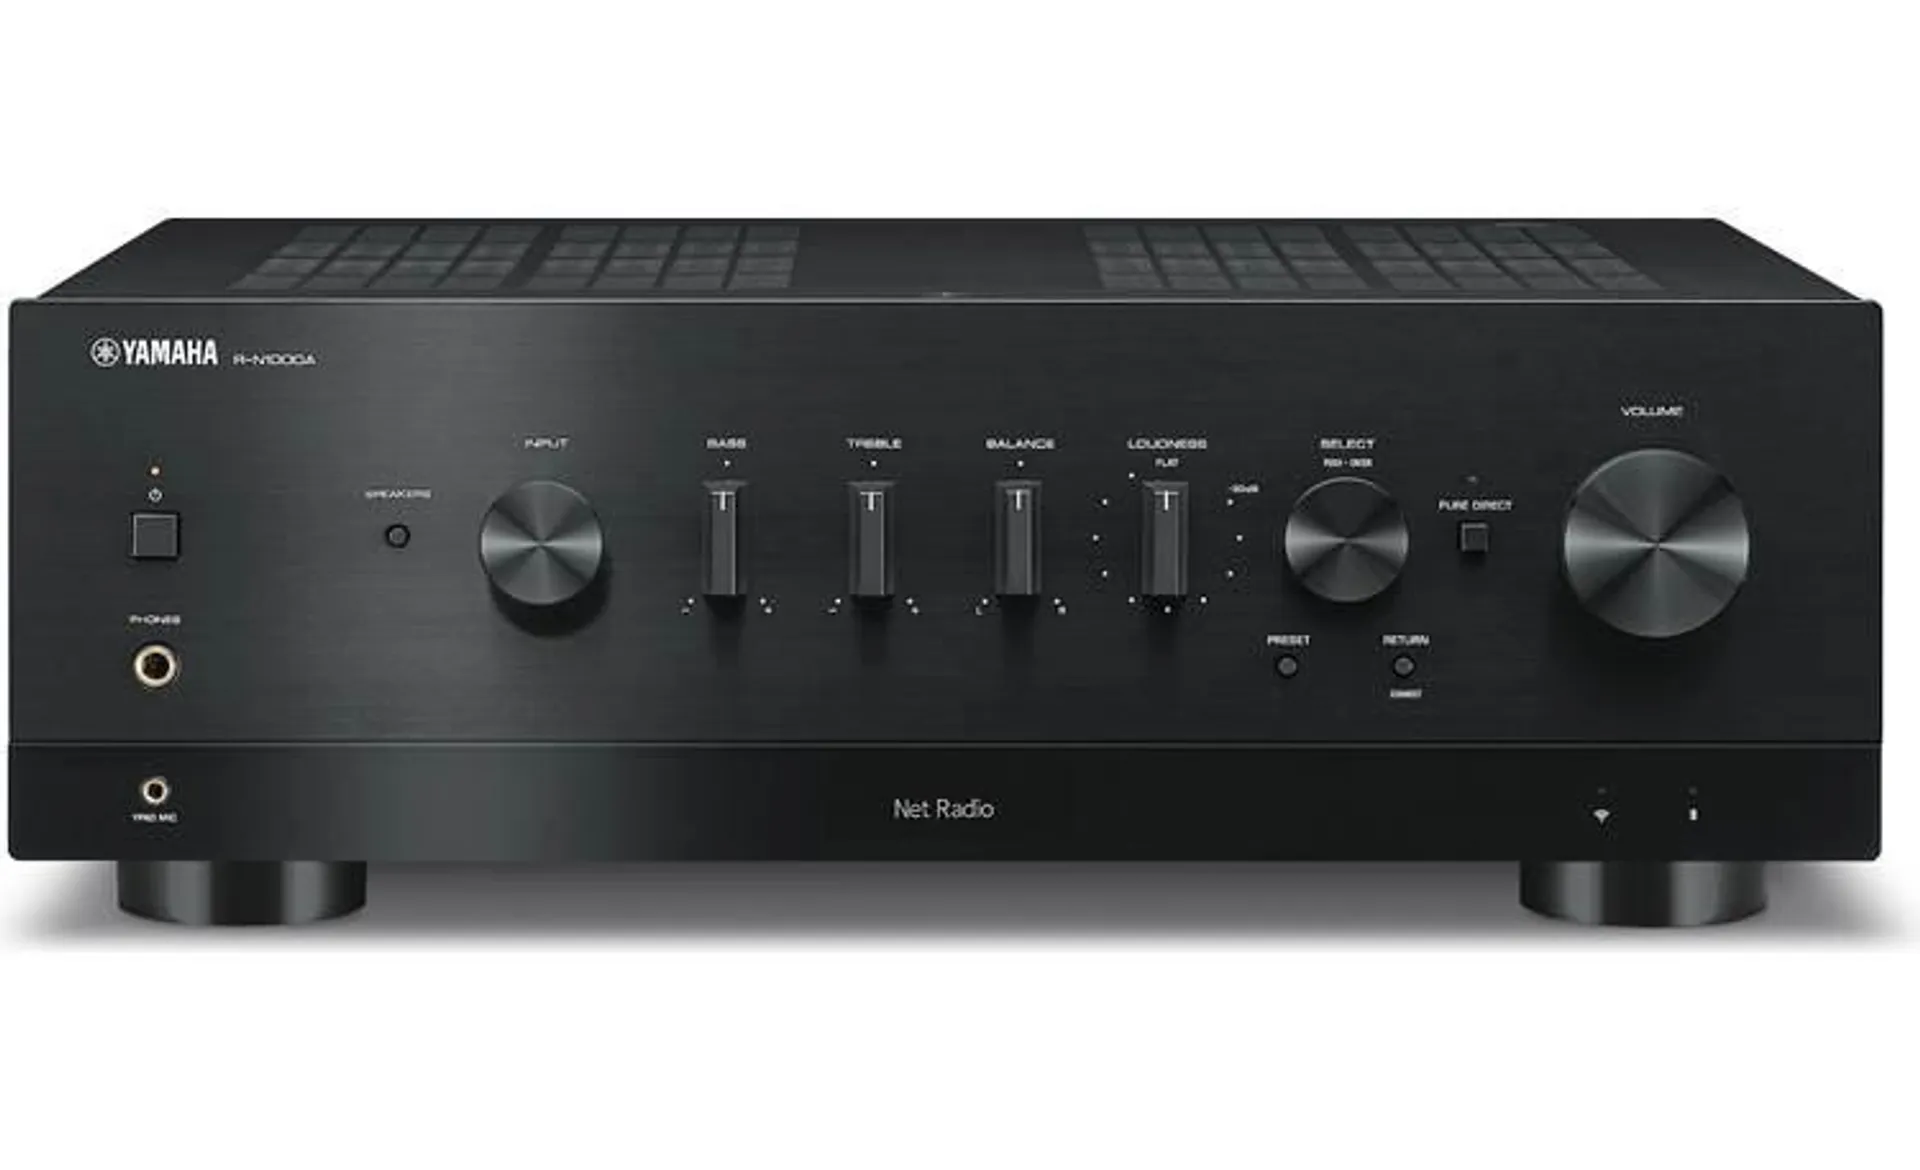 Yamaha R-N1000A Stereo receiver with Wi-Fi, Bluetooth®, Apple AirPlay® 2, and HDMI (Black)